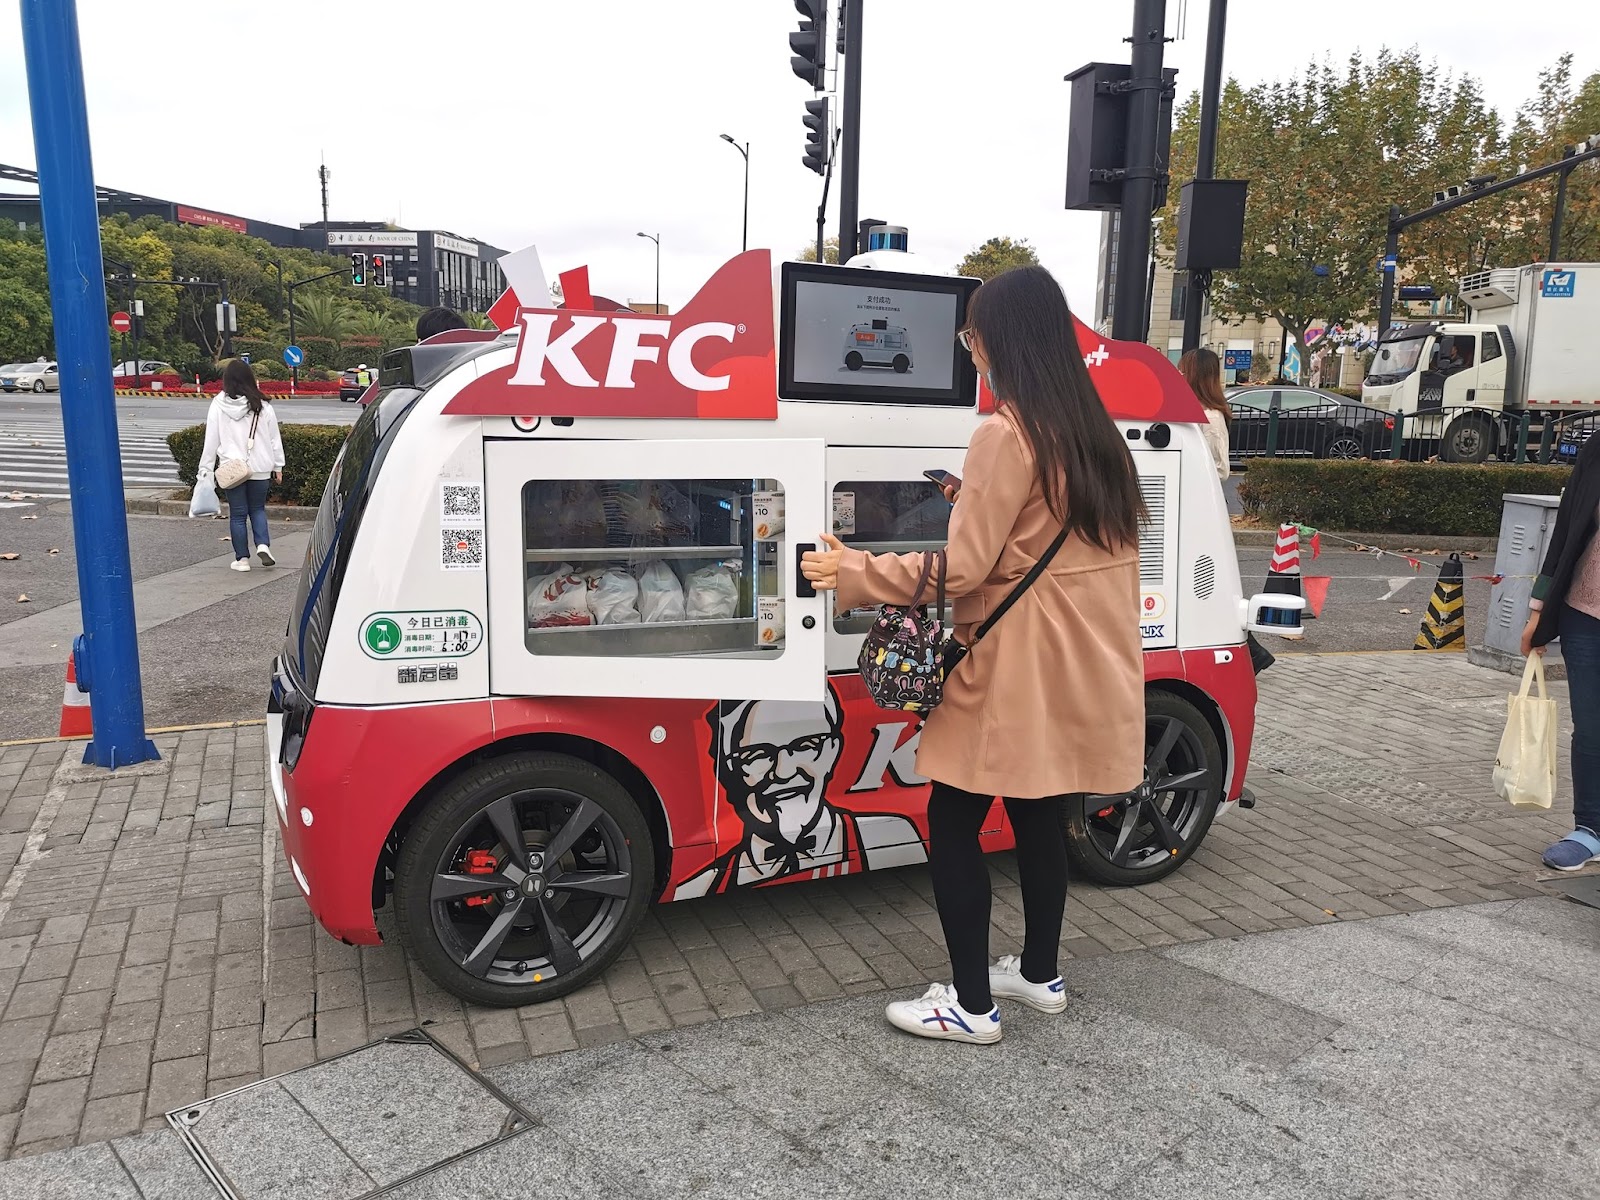 KFC uses QR Codes on vehicles for menu and payment